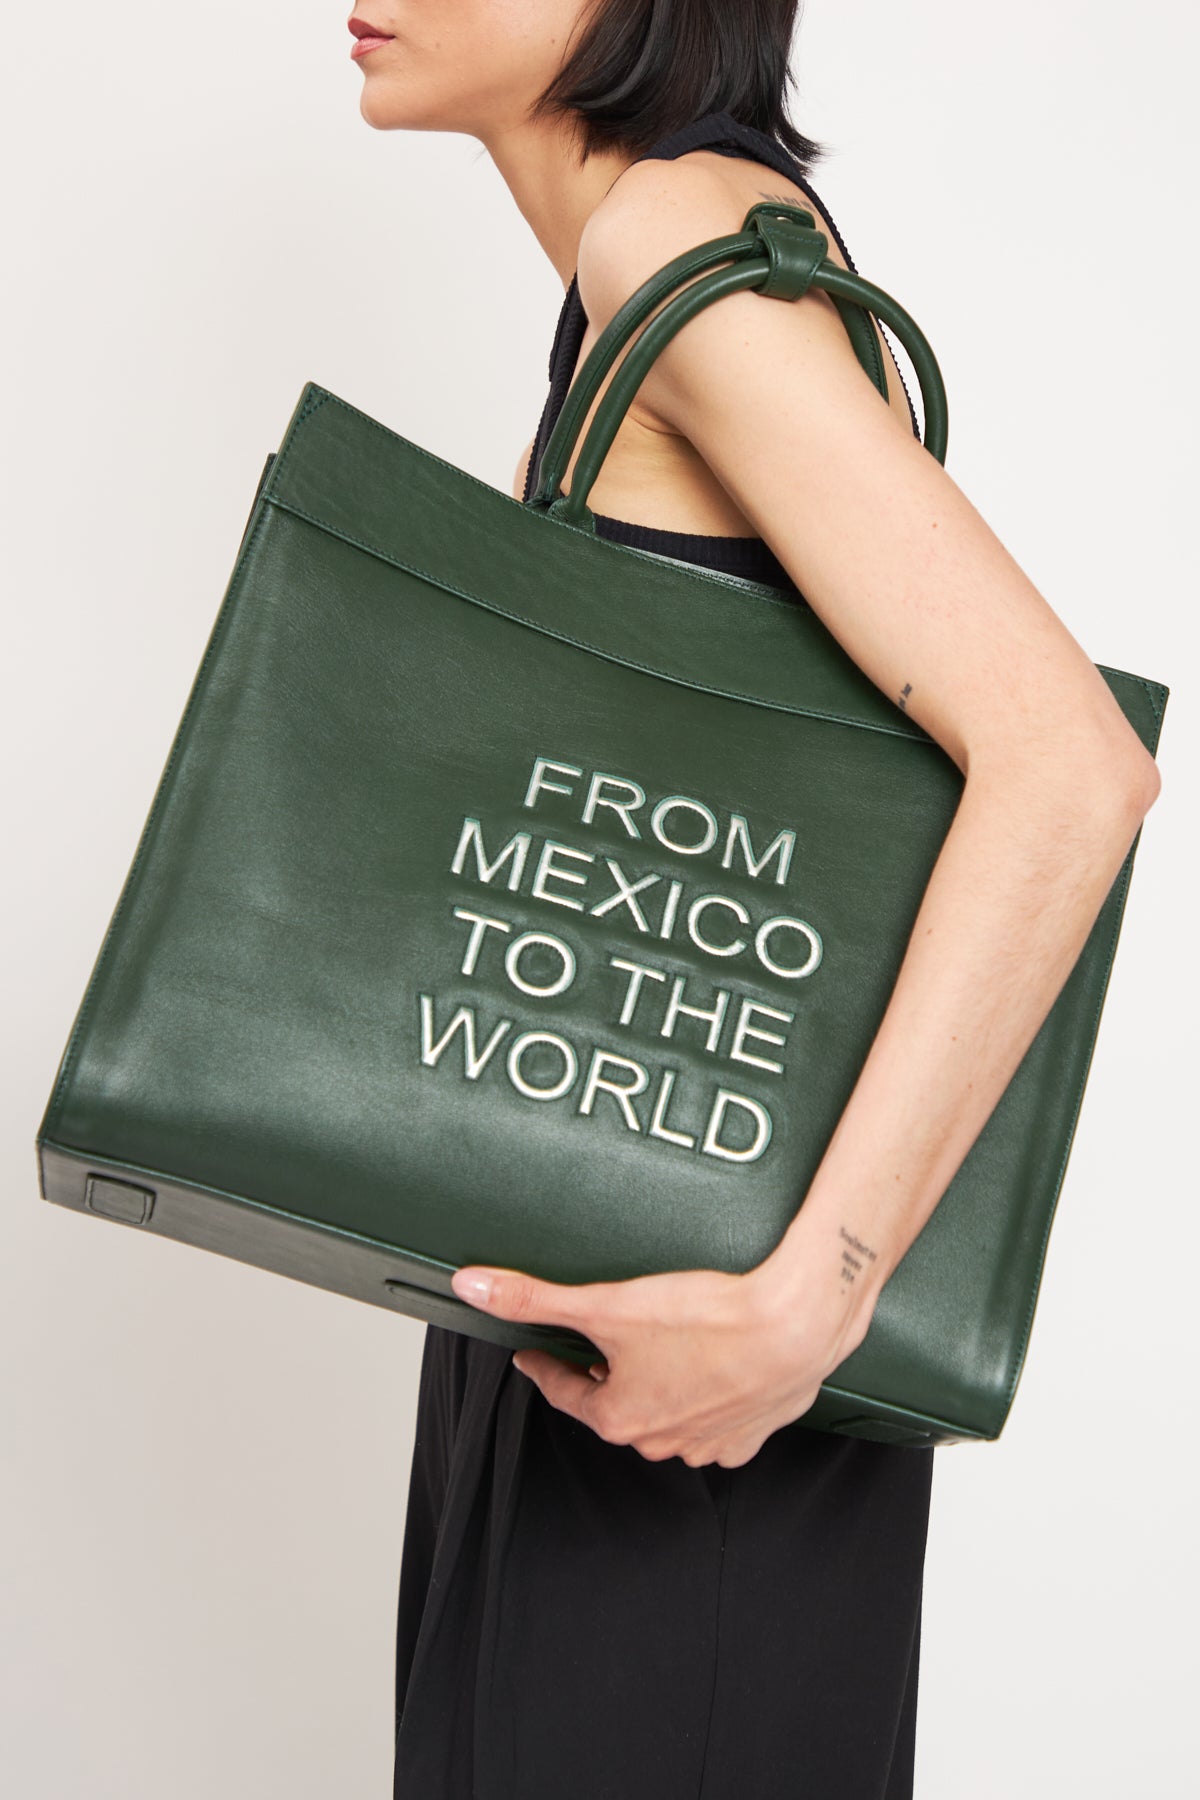 Tote From Mexico to the World Large